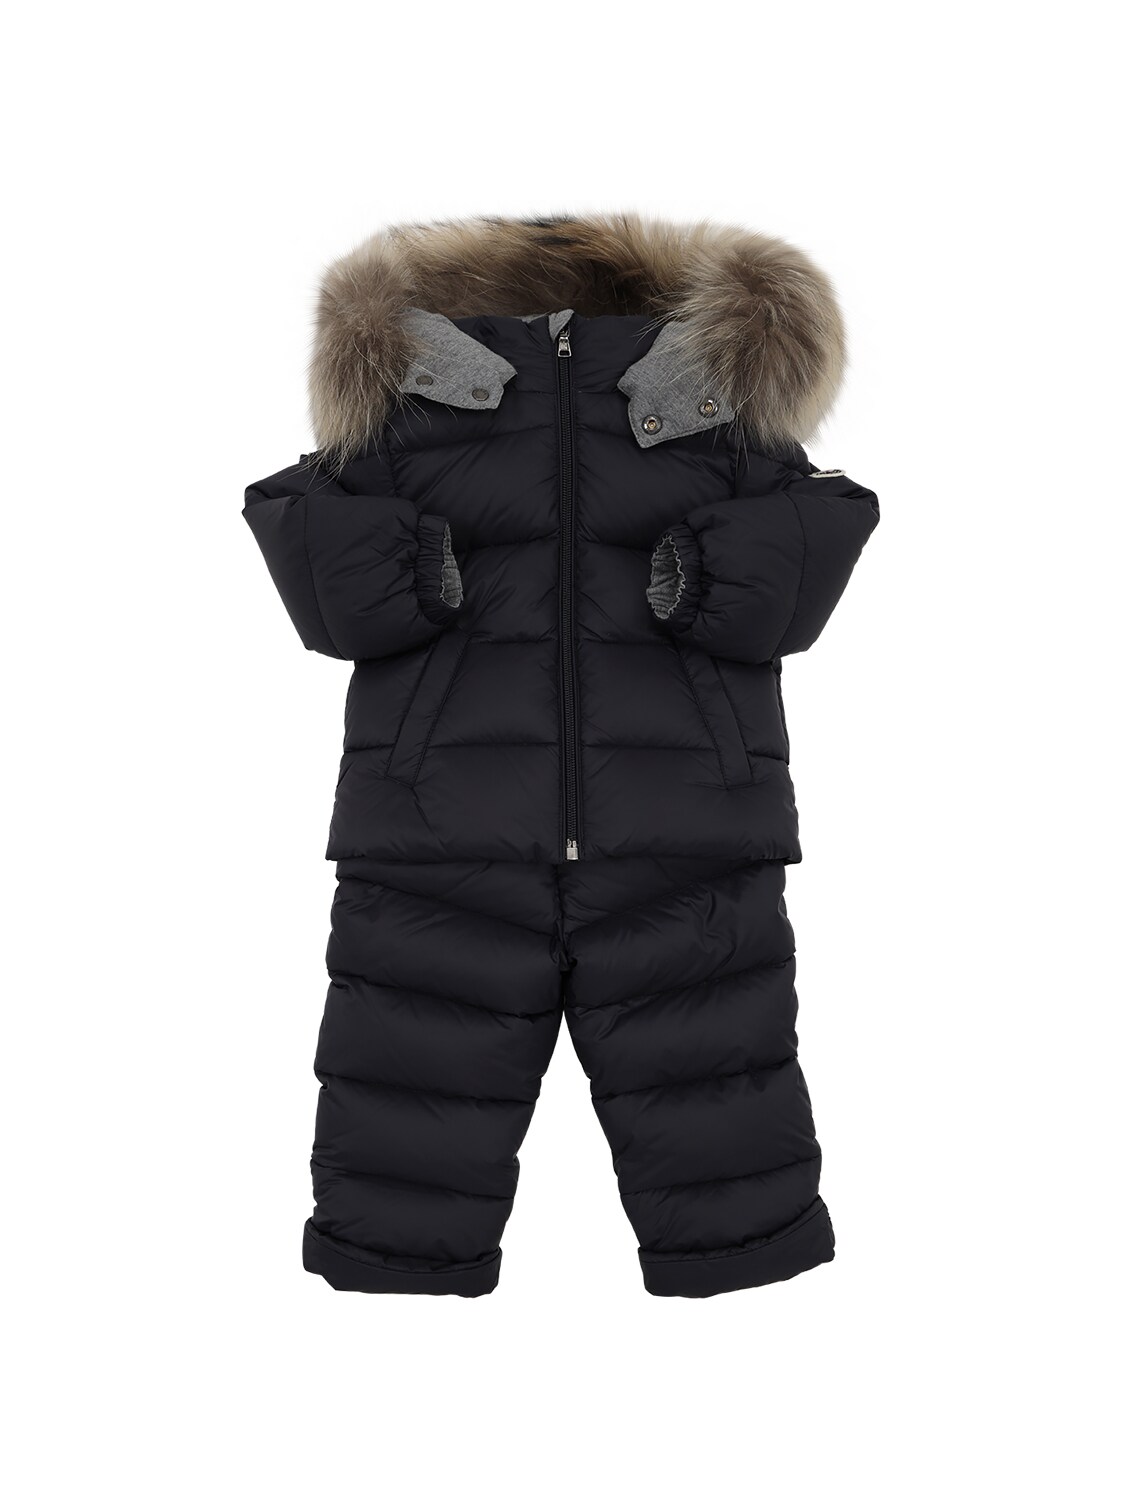 Moncler Kids' New Mauger Nylon Down Jacket & Pants In Navy